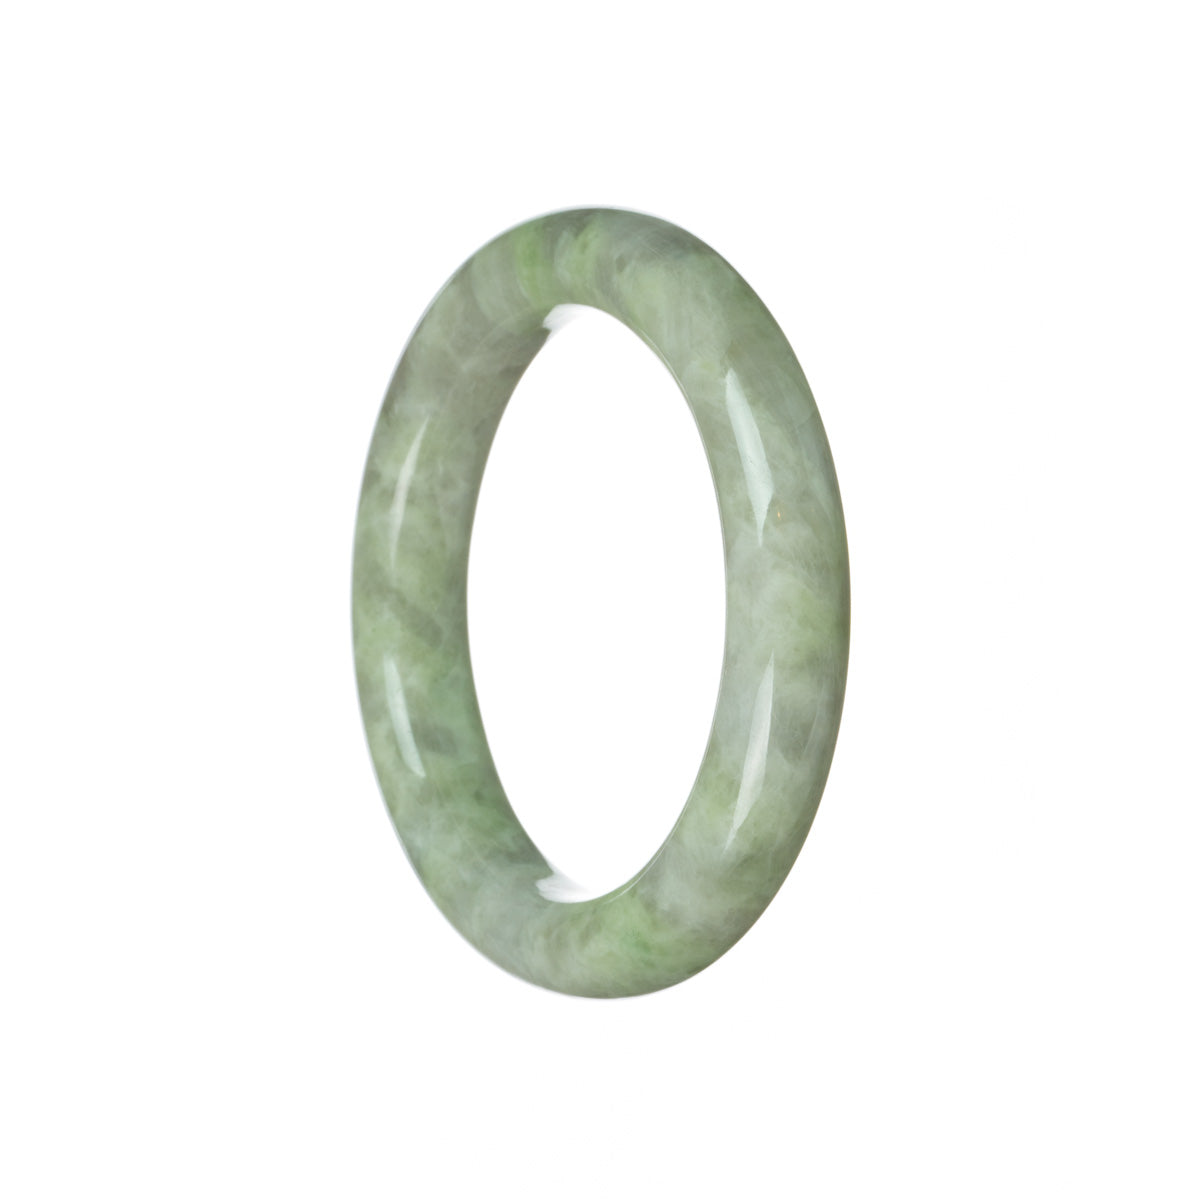 A round bracelet made of genuine untreated green and lavender Jadeite Jade, measuring 55mm in diameter, from the brand MAYS.